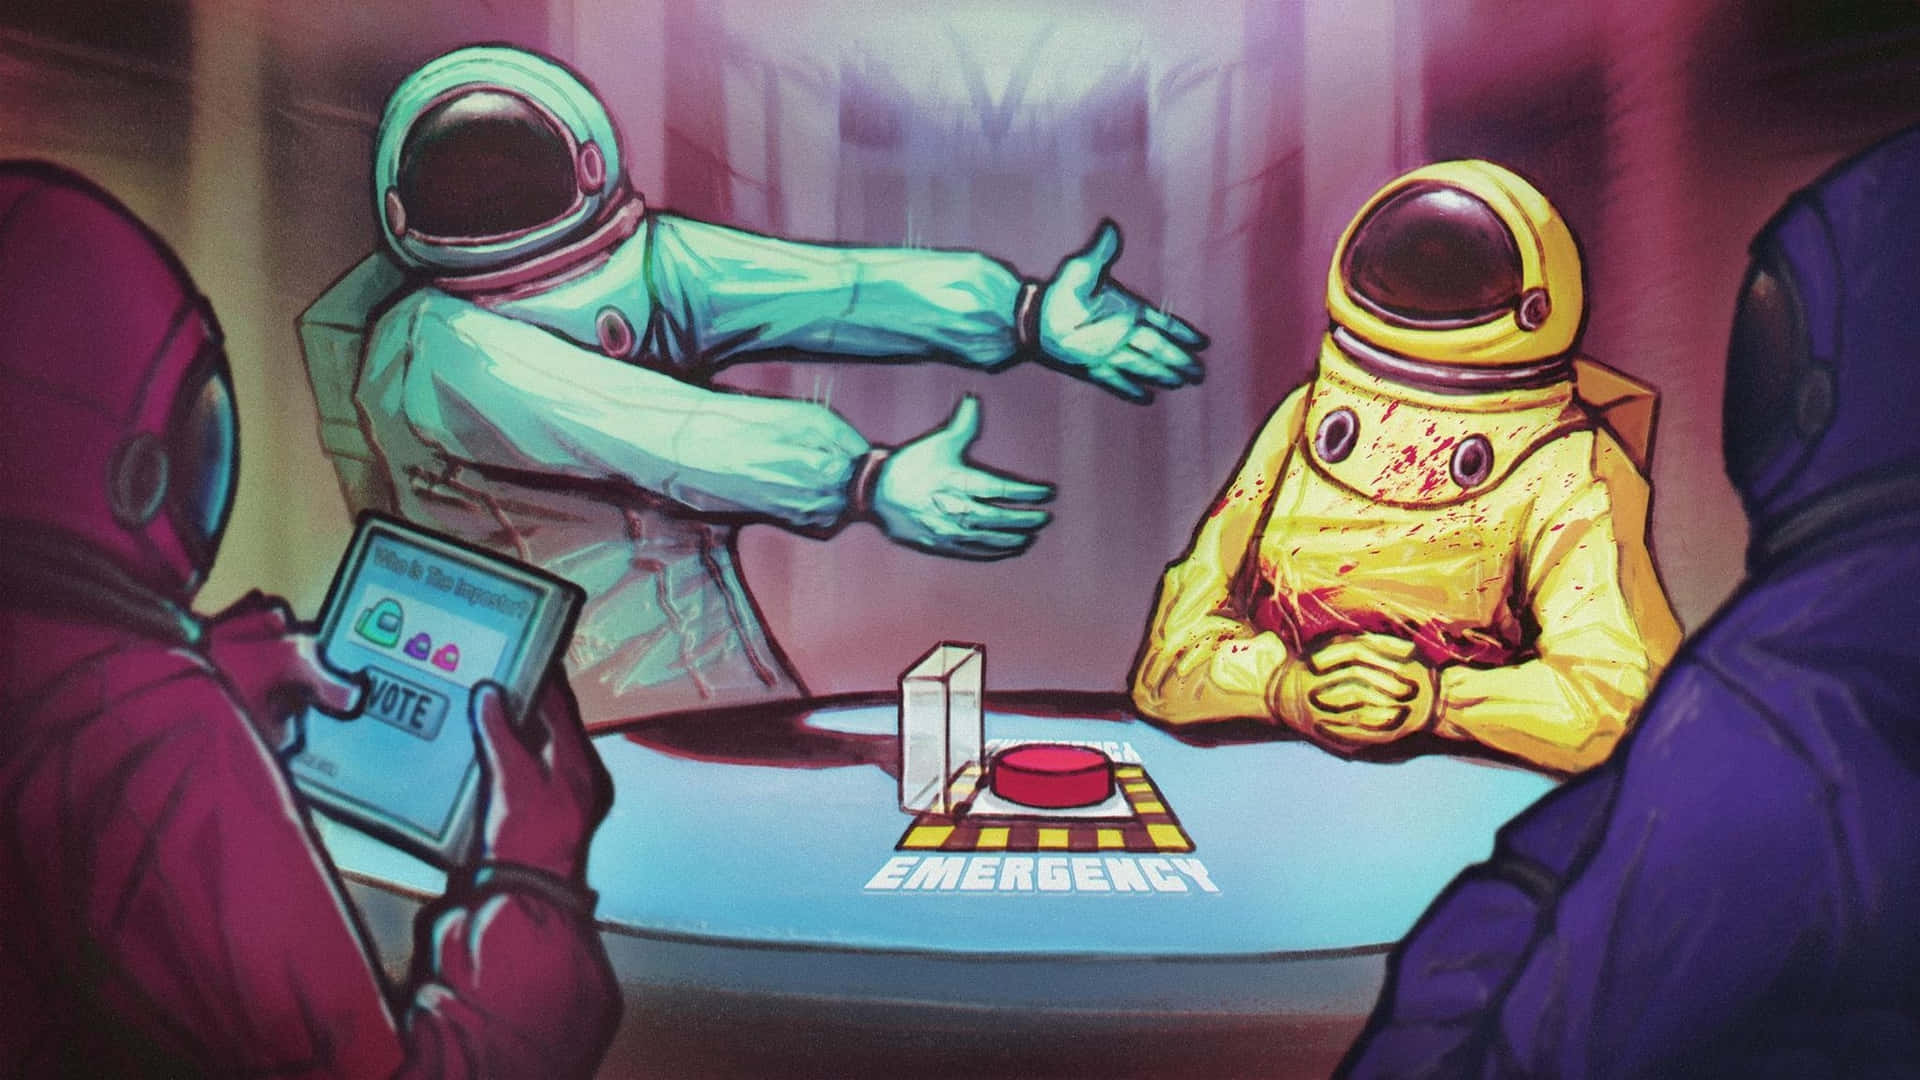 A Group Of People In Space Suits Are Playing A Game Of Poker